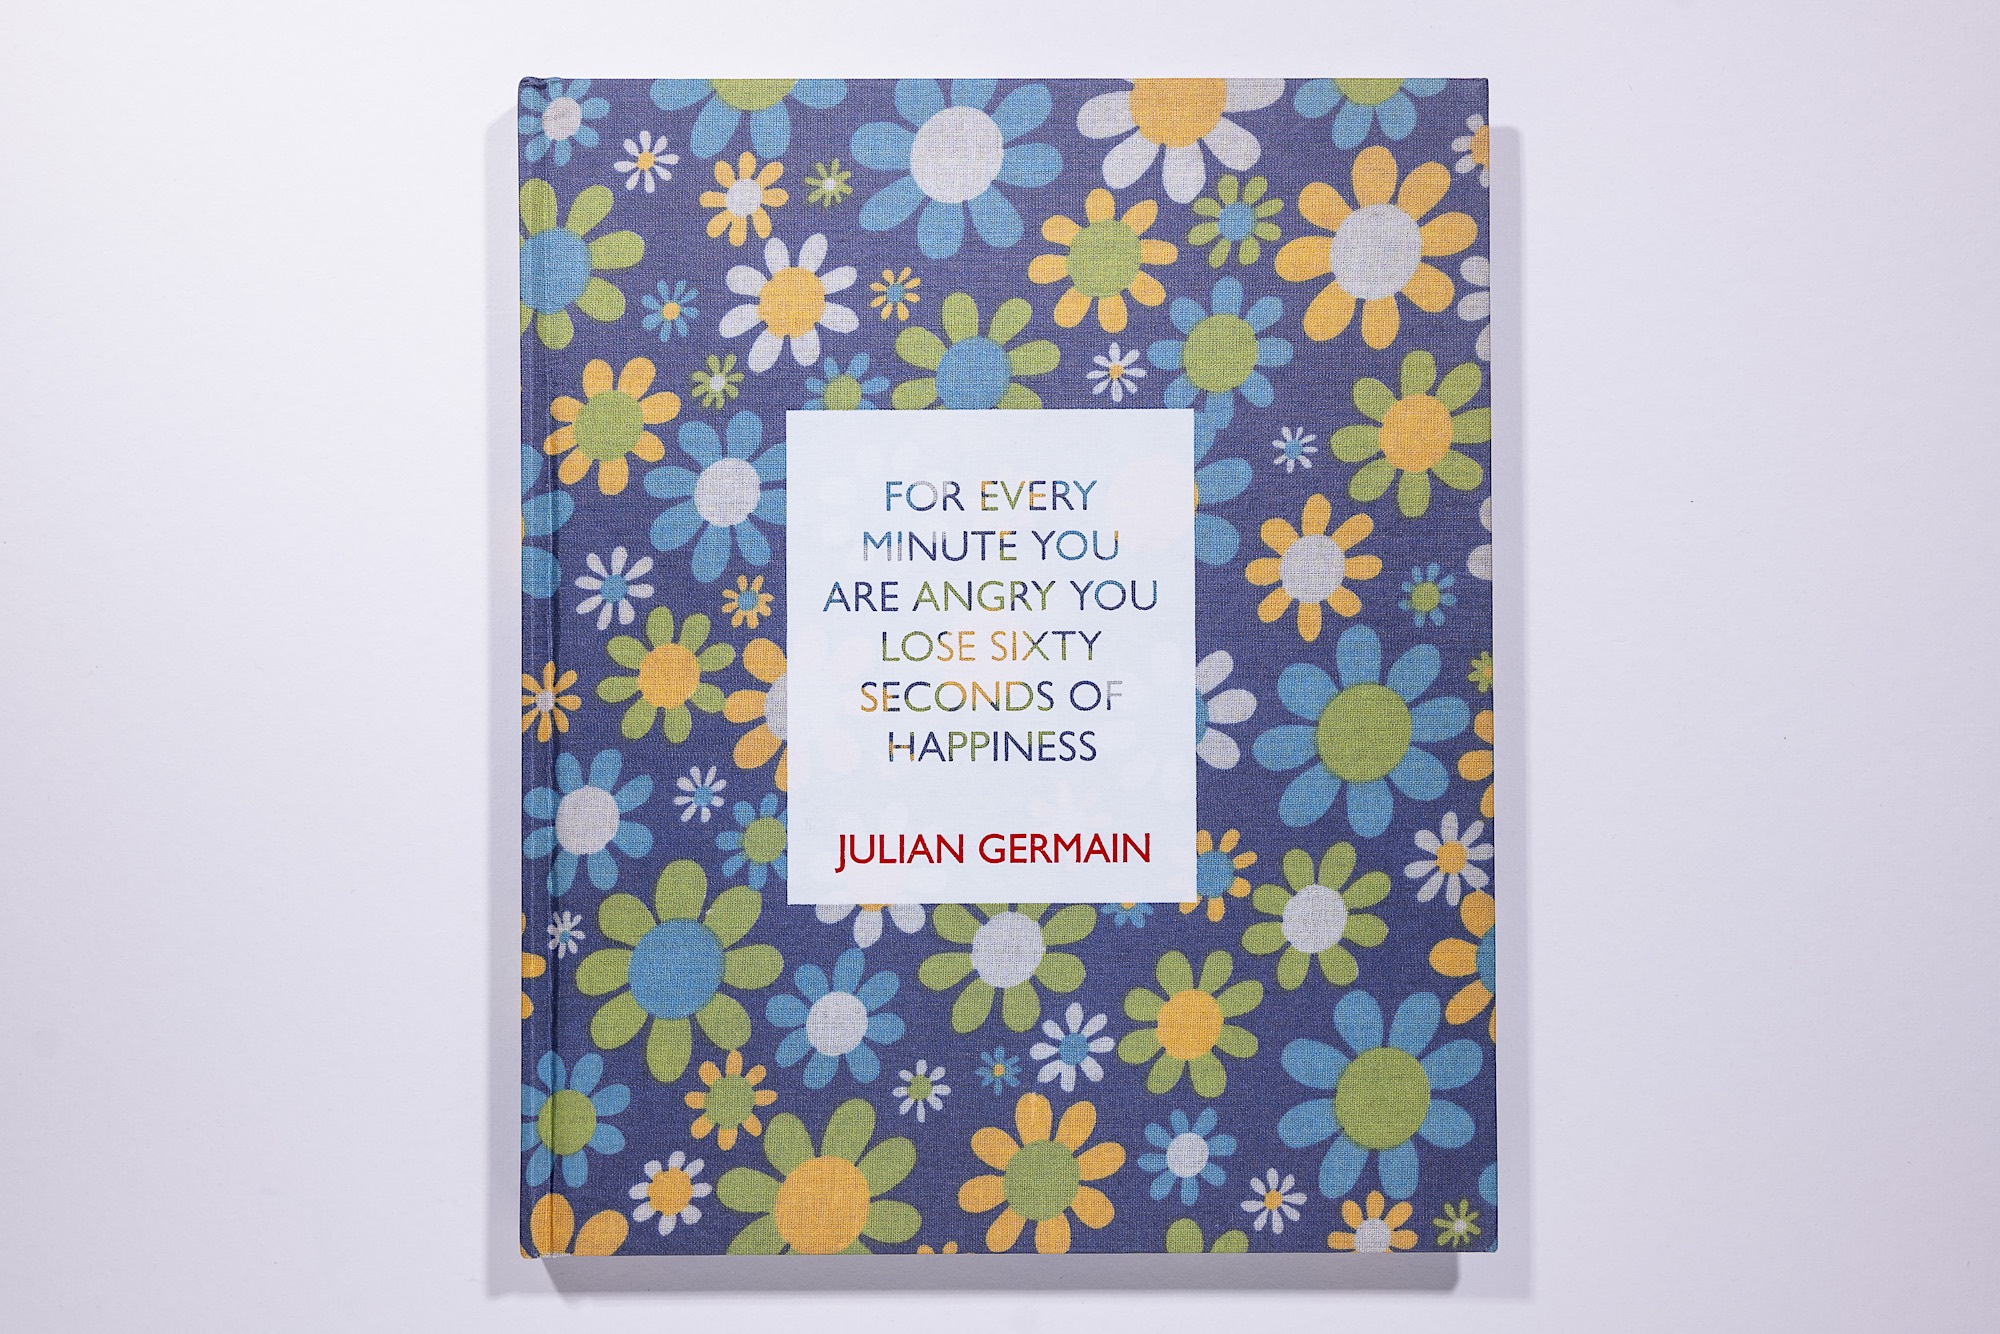 Julian Germain - For Every Minute You Are Angry You Lose Sixty Seconds of Happiness (Third Edition) Image 1